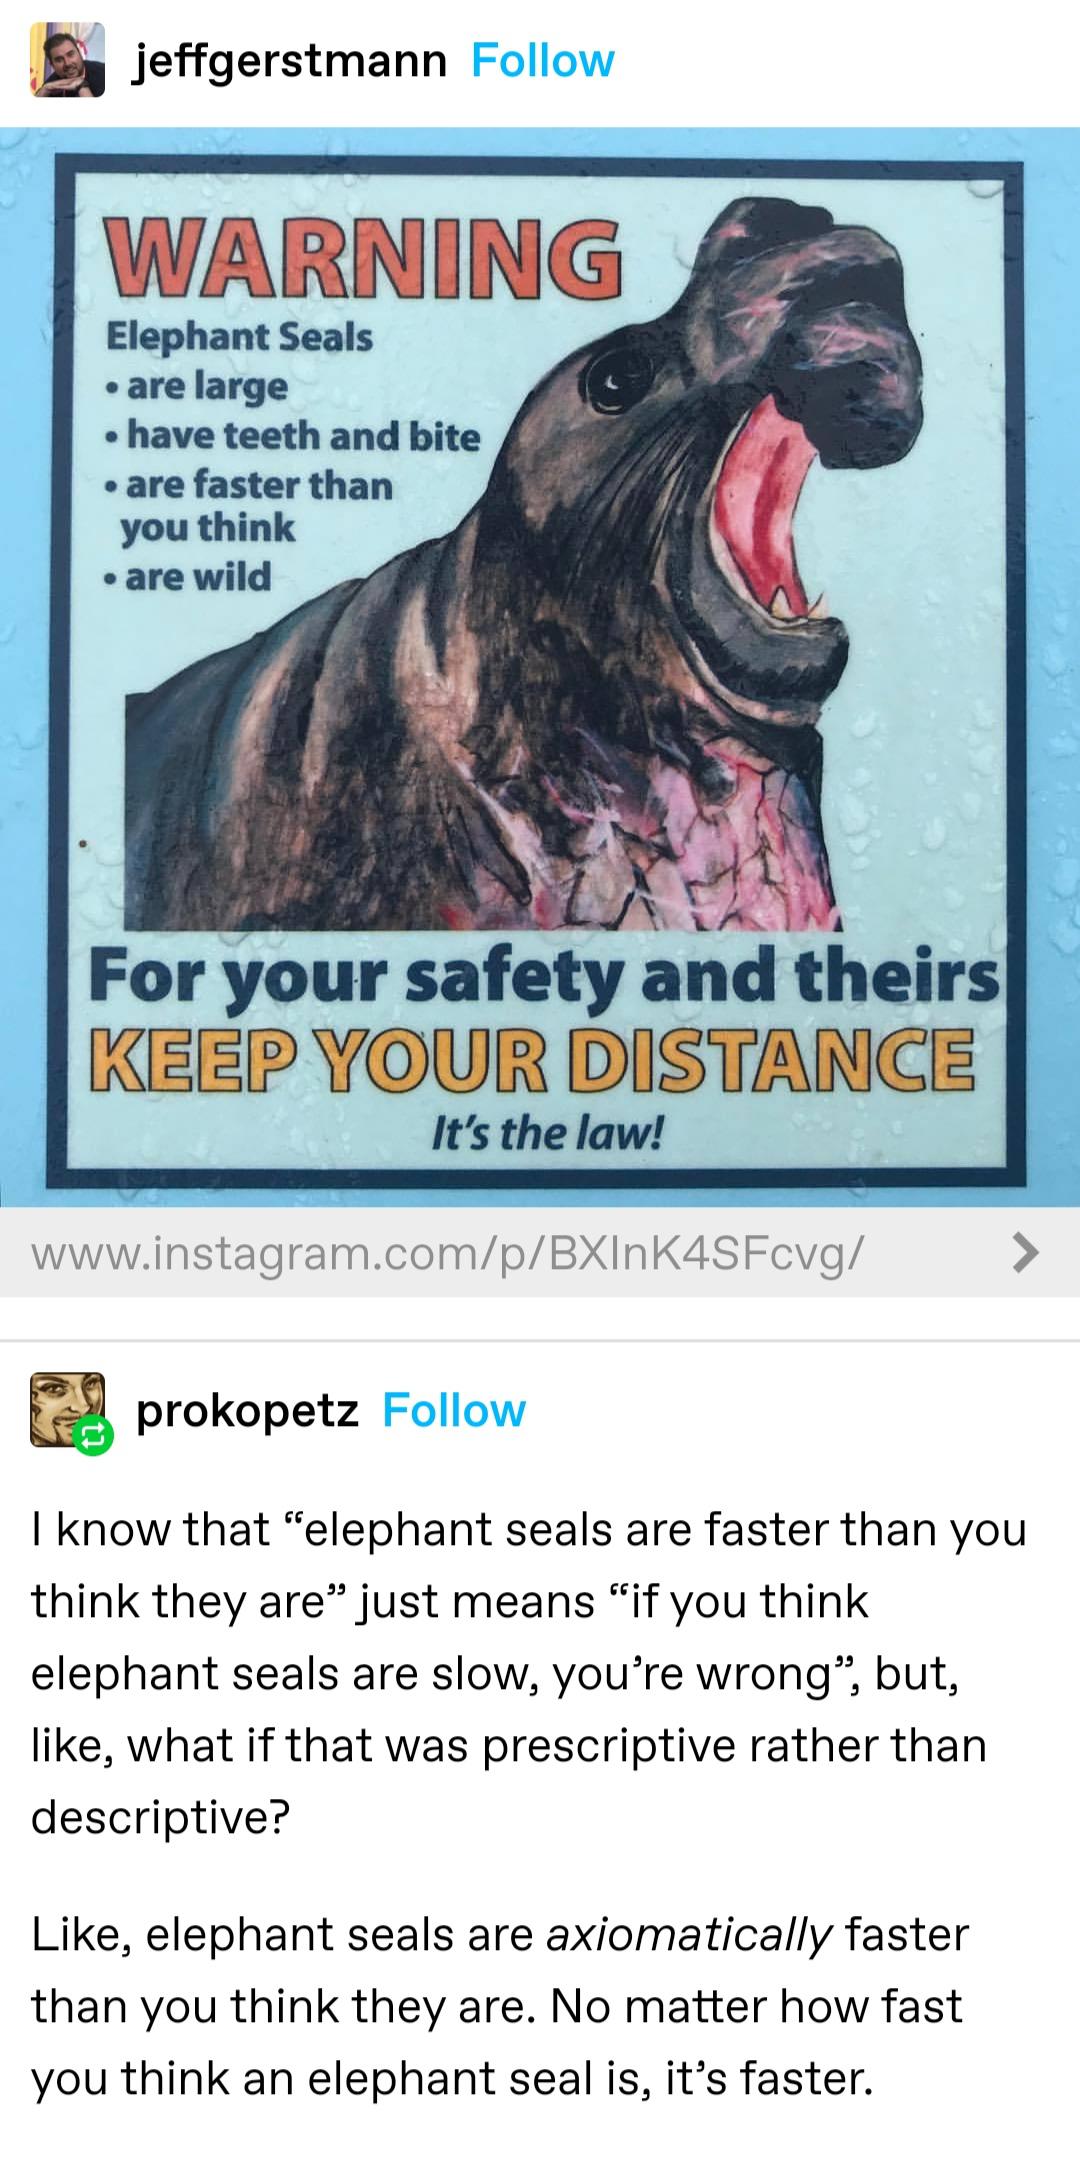 Elephant seals are a new cryptid.